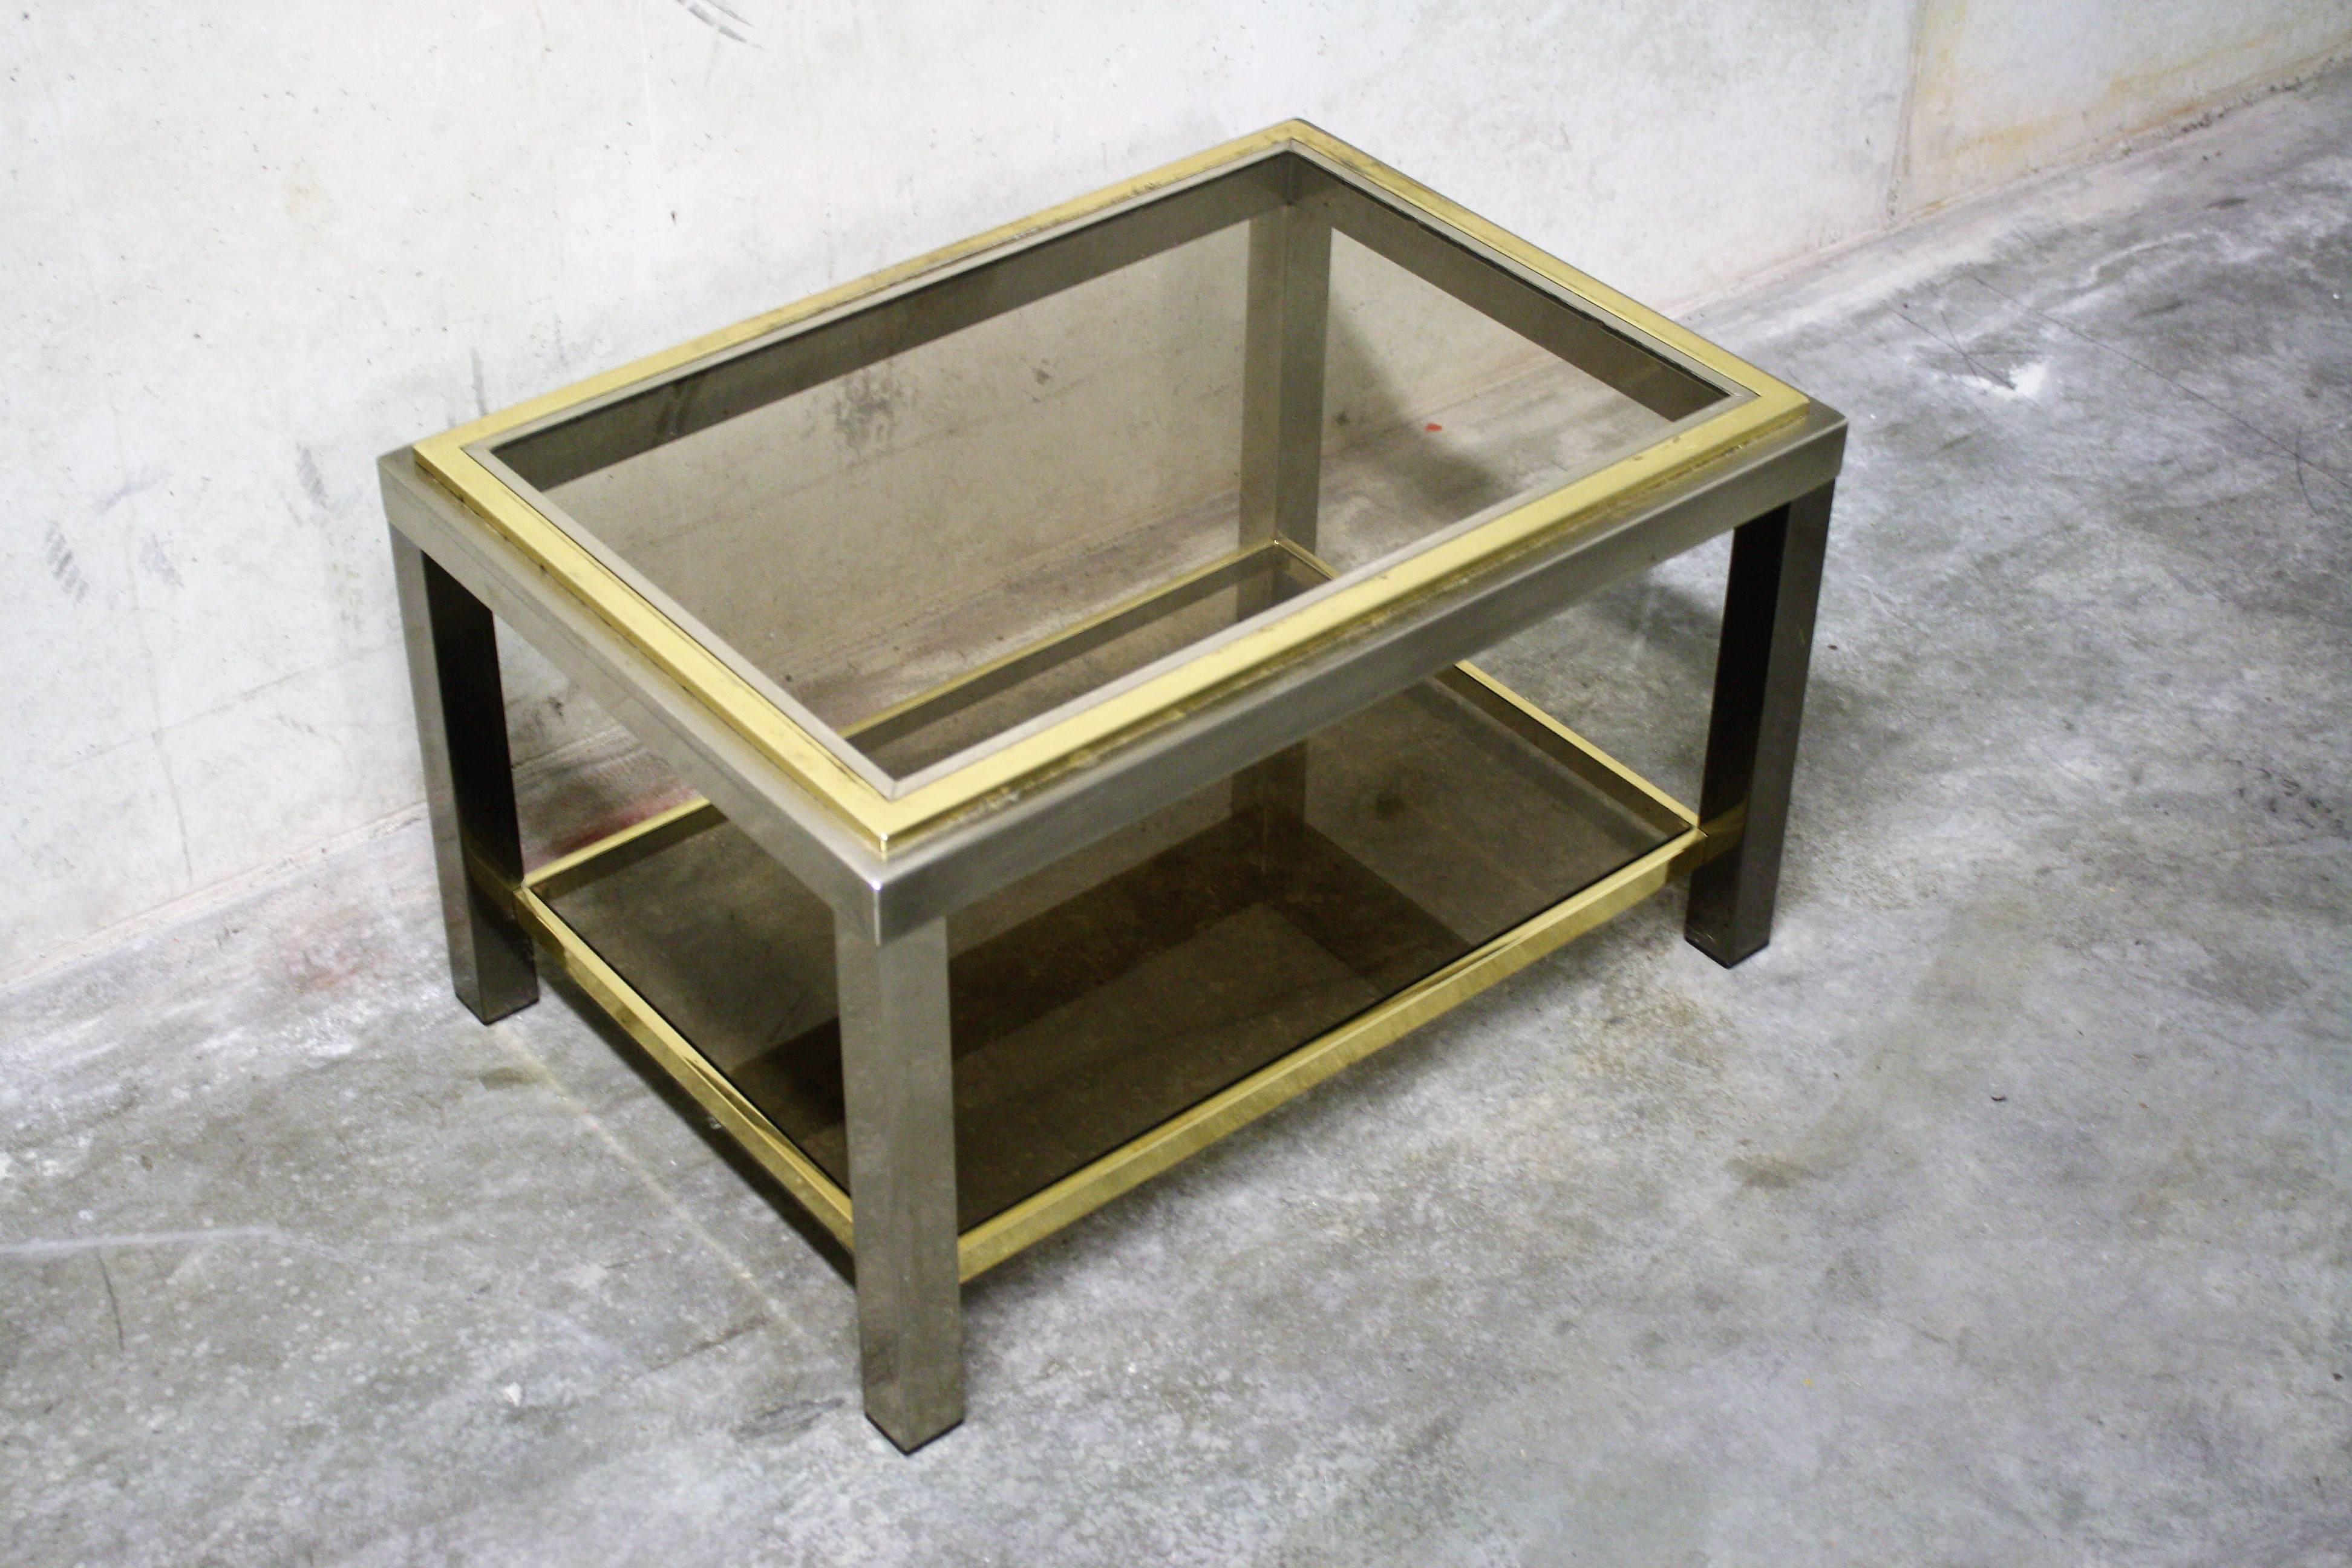 Vintage side table made from brass and chrome with two-tier smoked glass.

Good condition of the brass and the chrome, original glass.

1970s France

Measures: Height: 40 cm
Width: 65 cm
Depth: 48 cm.